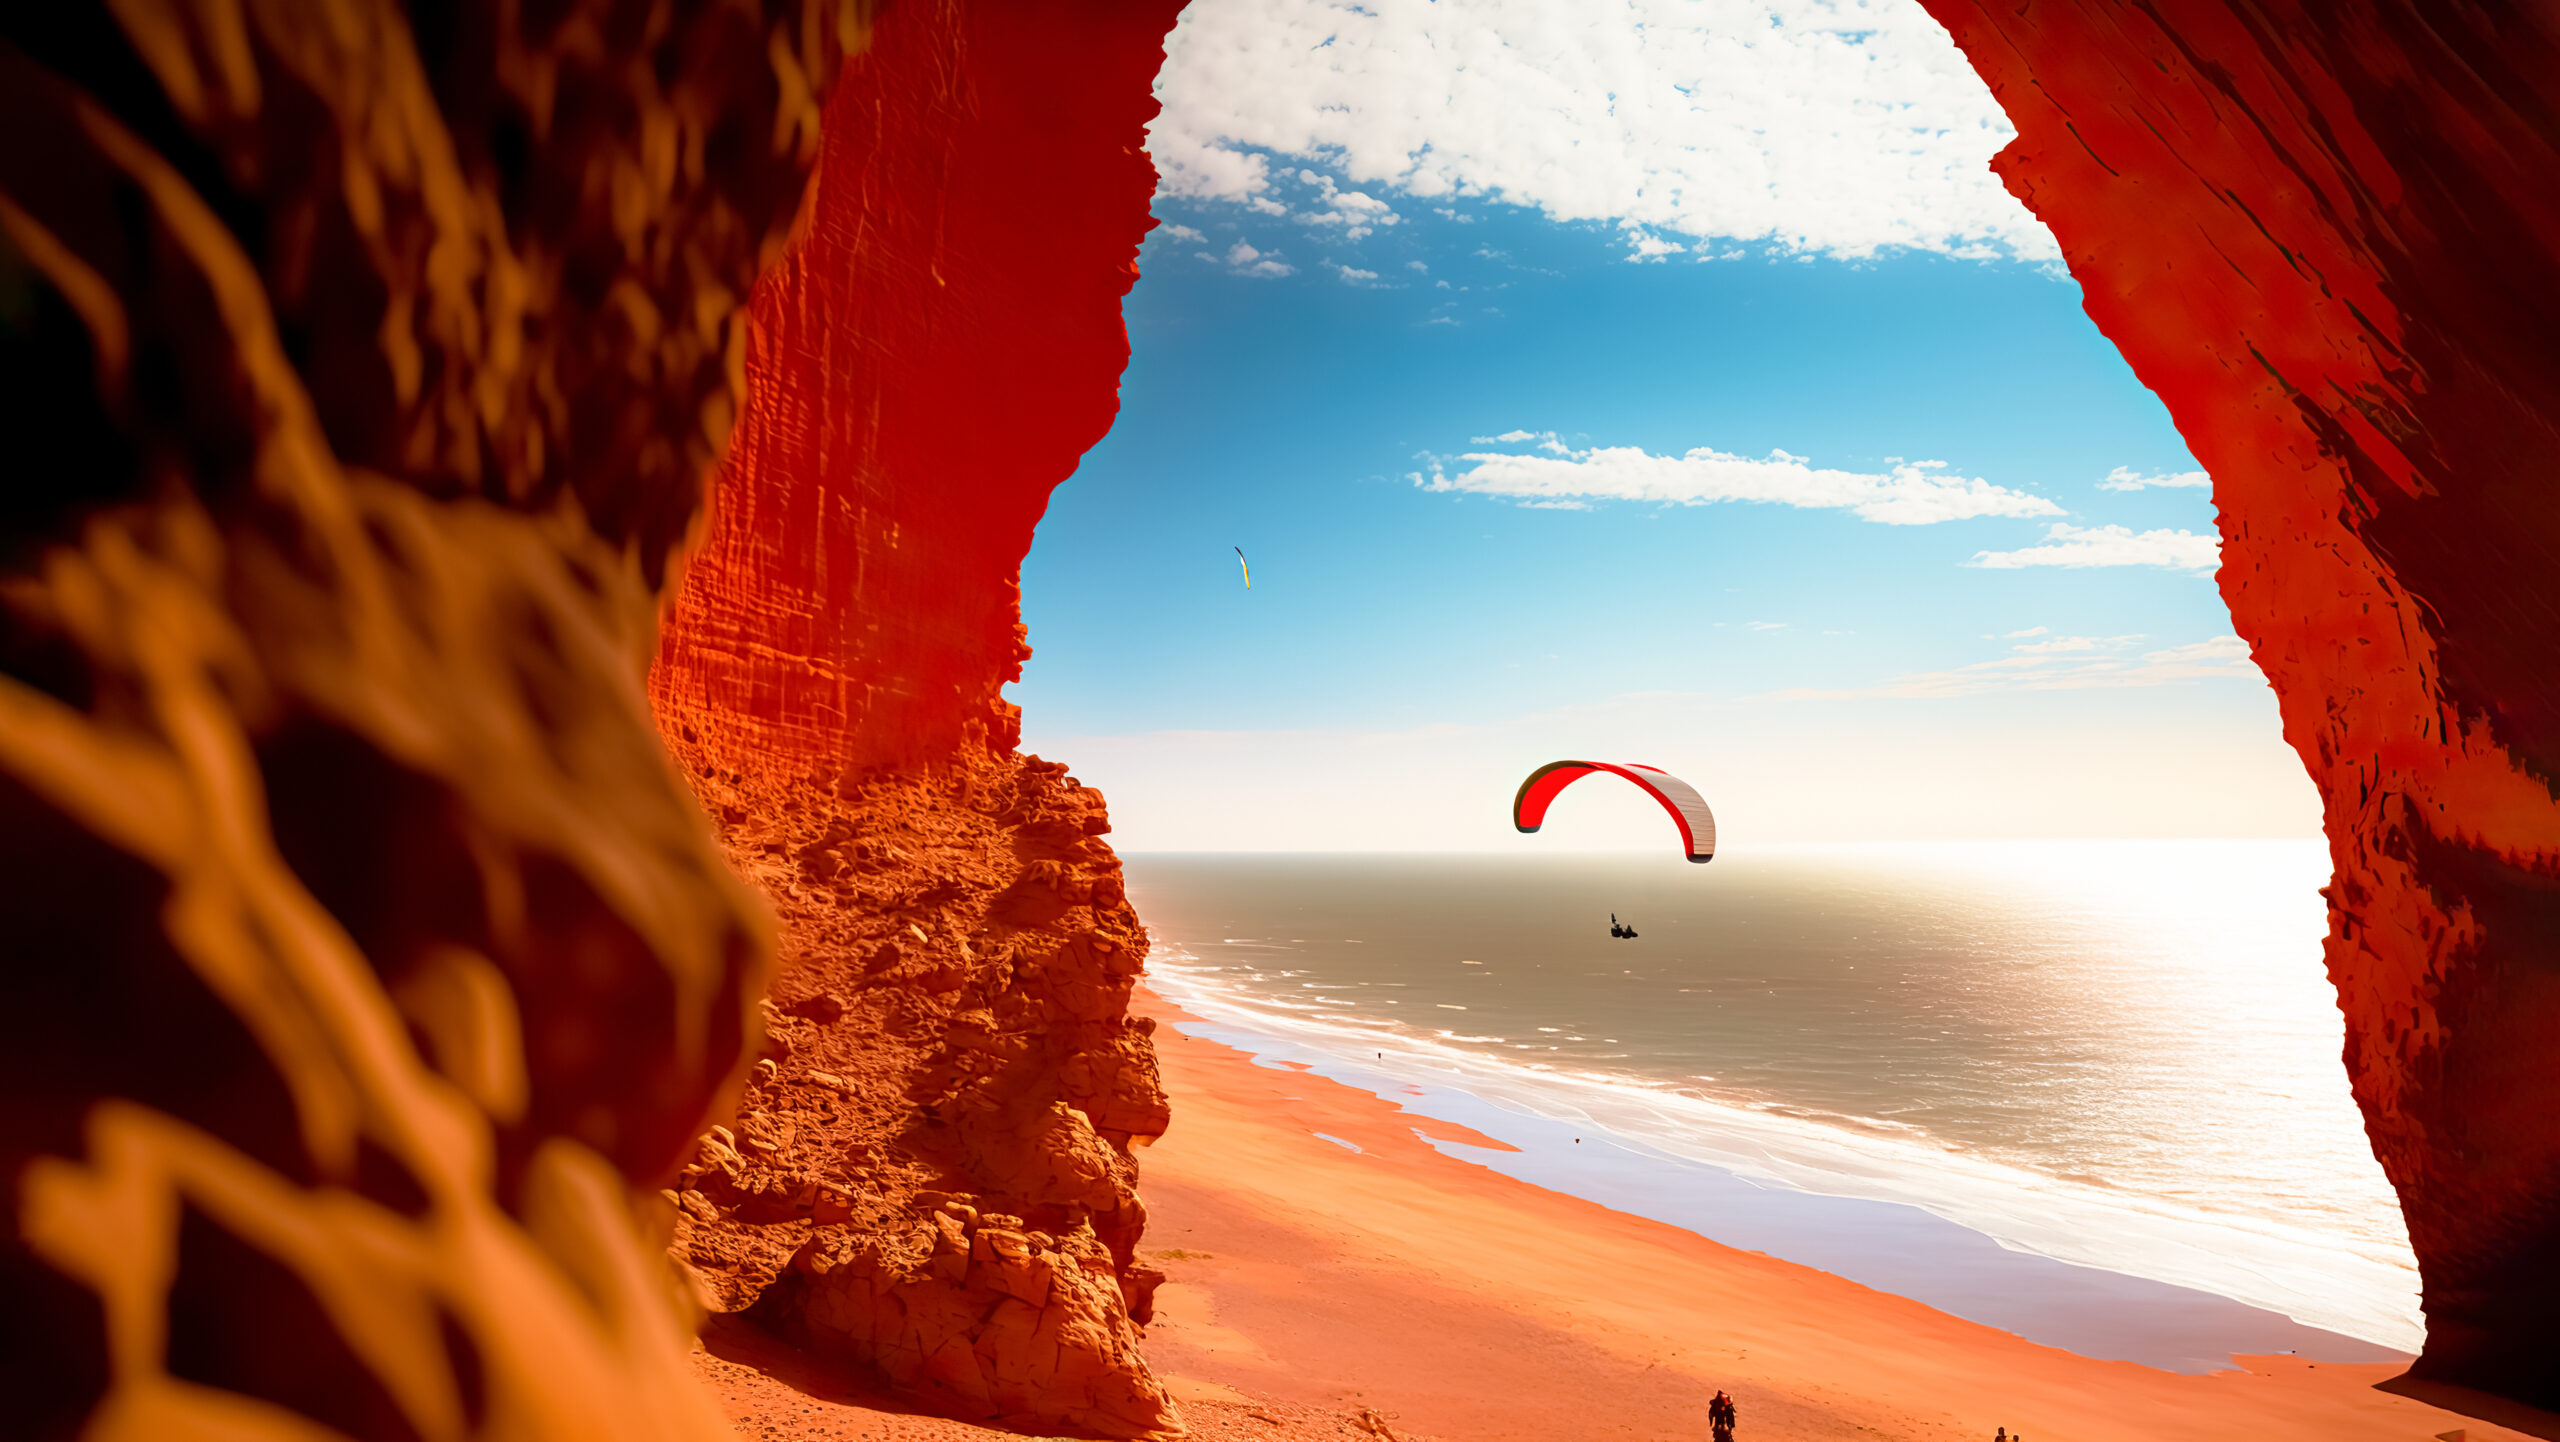 production-services-and-filming-in-marocco-kite-at-red-arches-on-the-beach